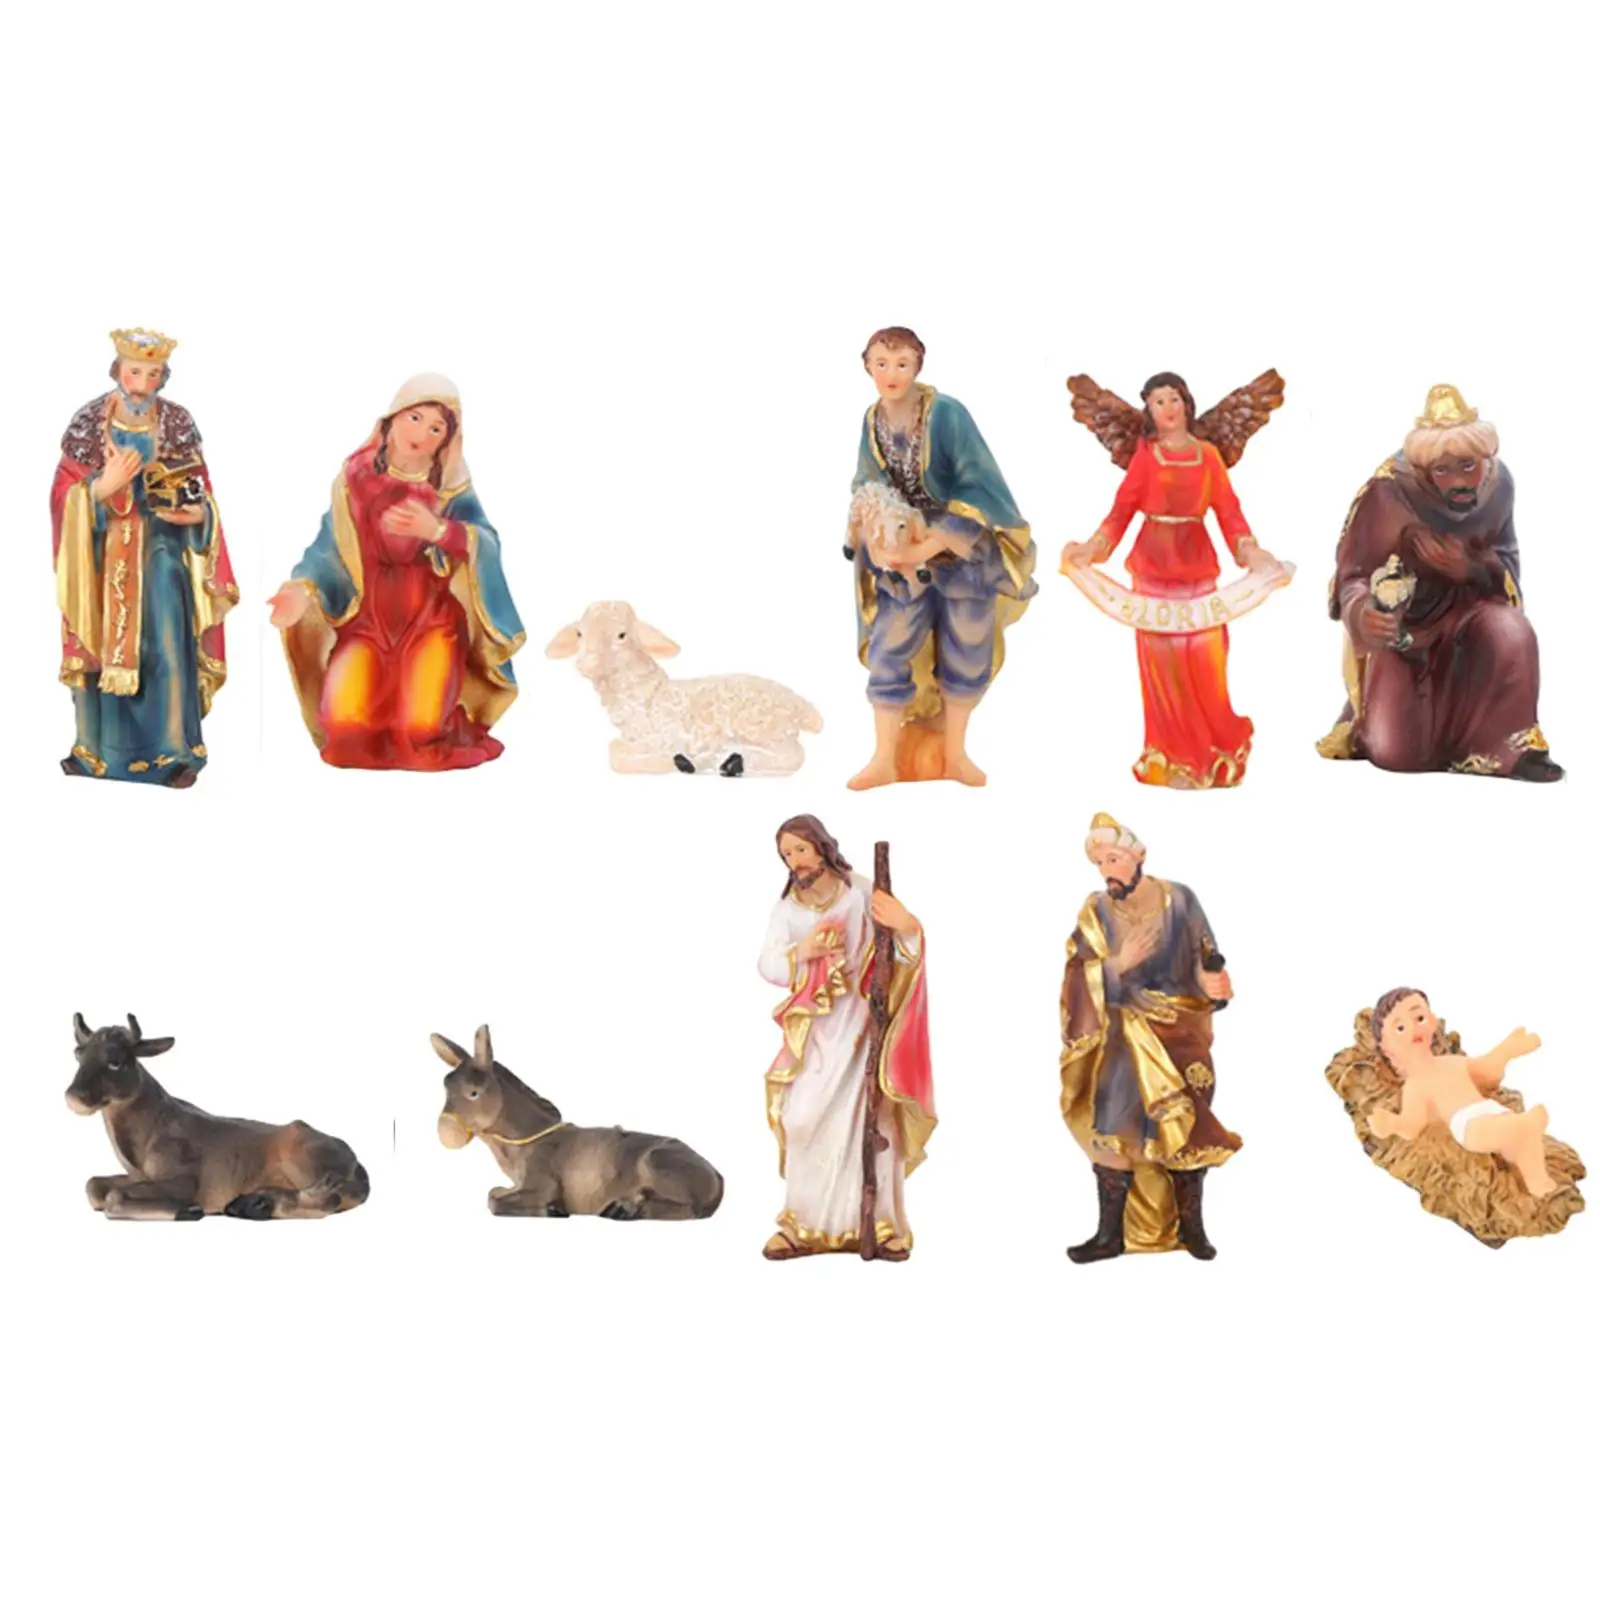 11 Pieces Nativity Scene Figurines Christmas for Office Shelf Table